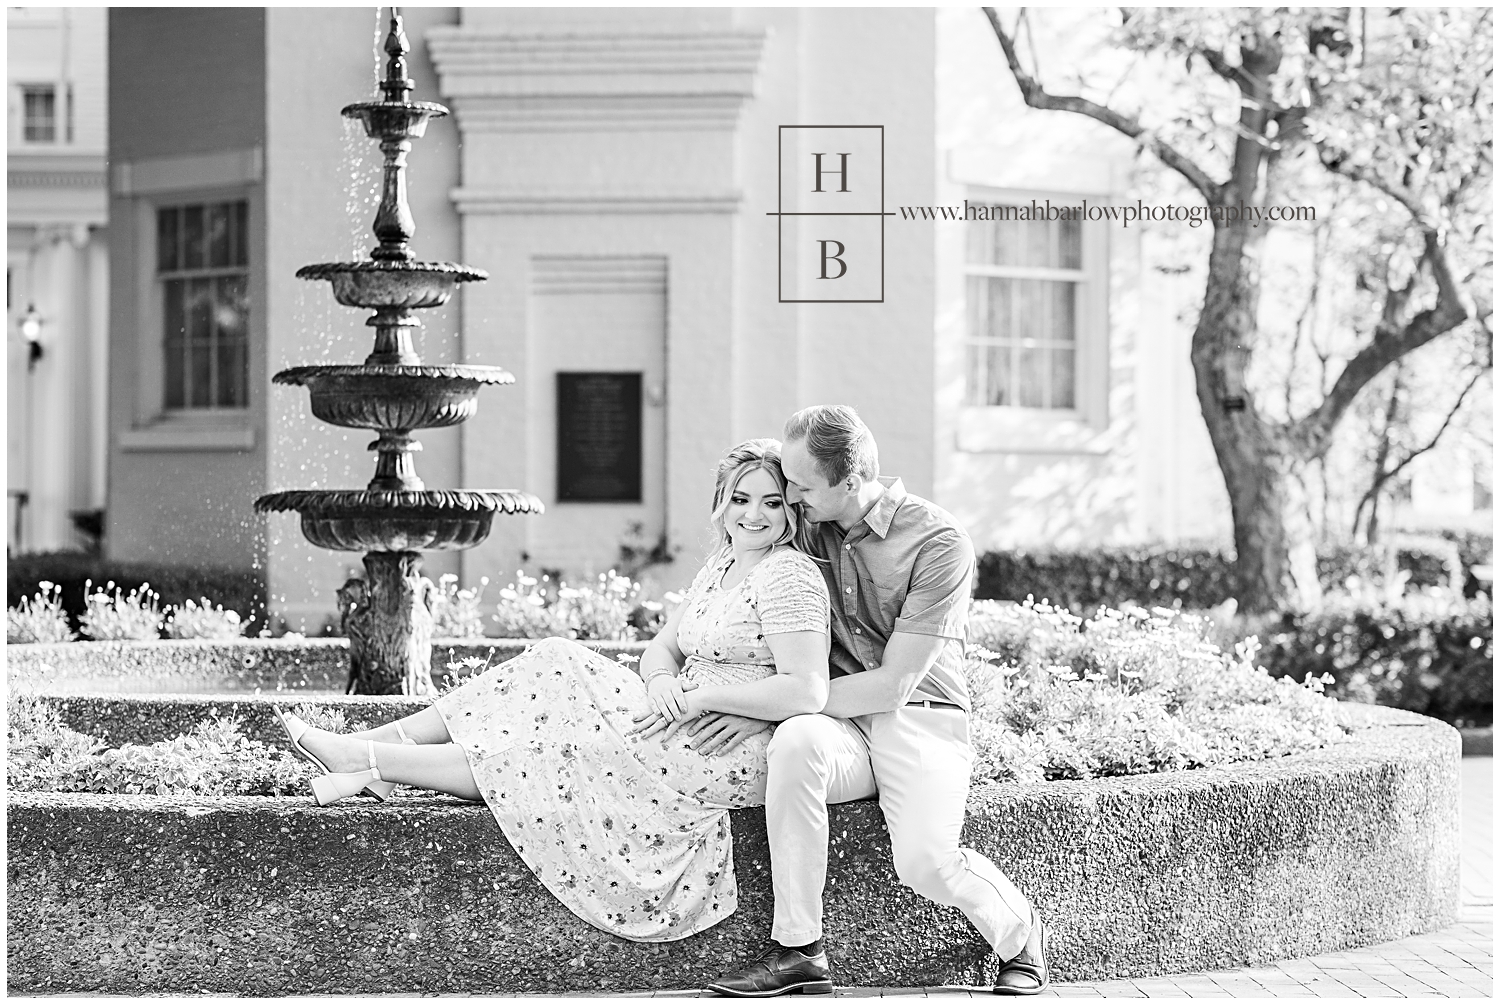 Man and fiancé pose on stone wall in front of water fountain and embrace for engagement photos.